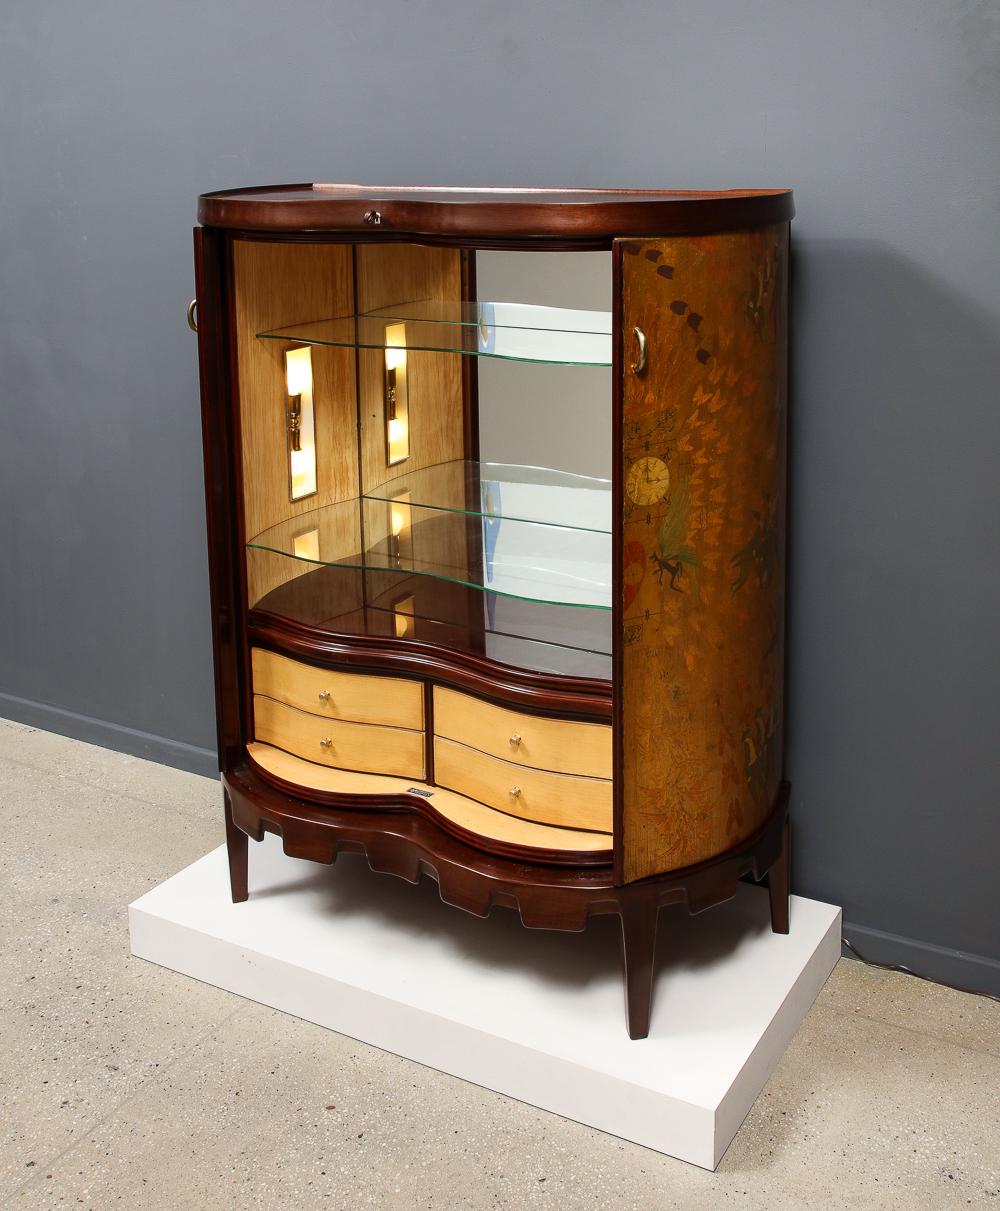 Drinks Cabinet, Model No. 6534B by Osvaldo Borsani for ABV.  Mahogany, painted wood, maple, glass, brass. Arredamenti Borsani Varedo edition. This cabinet features 2 front doors that retract into the cabinet revealing a lit interior with mirrored